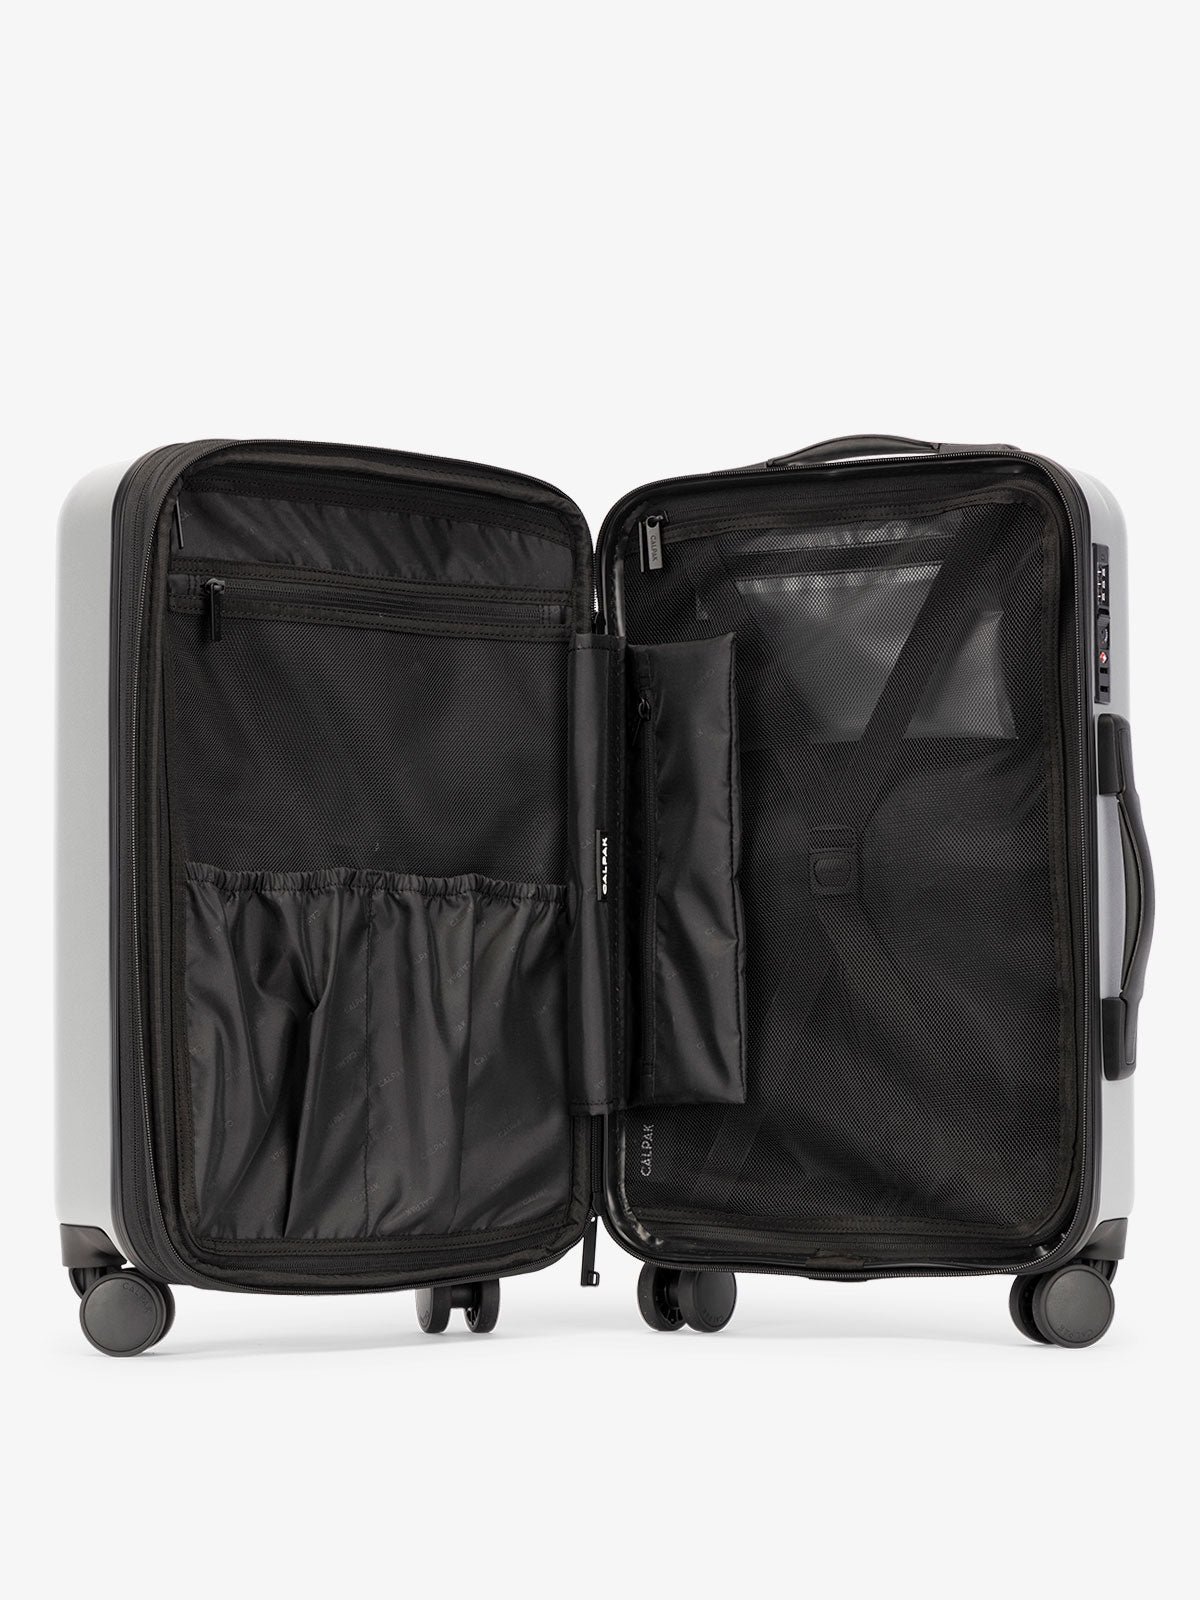 CALPAK Evry Carry-On Luggage features divided compartments with interior pockets for organized packing in smoke gray